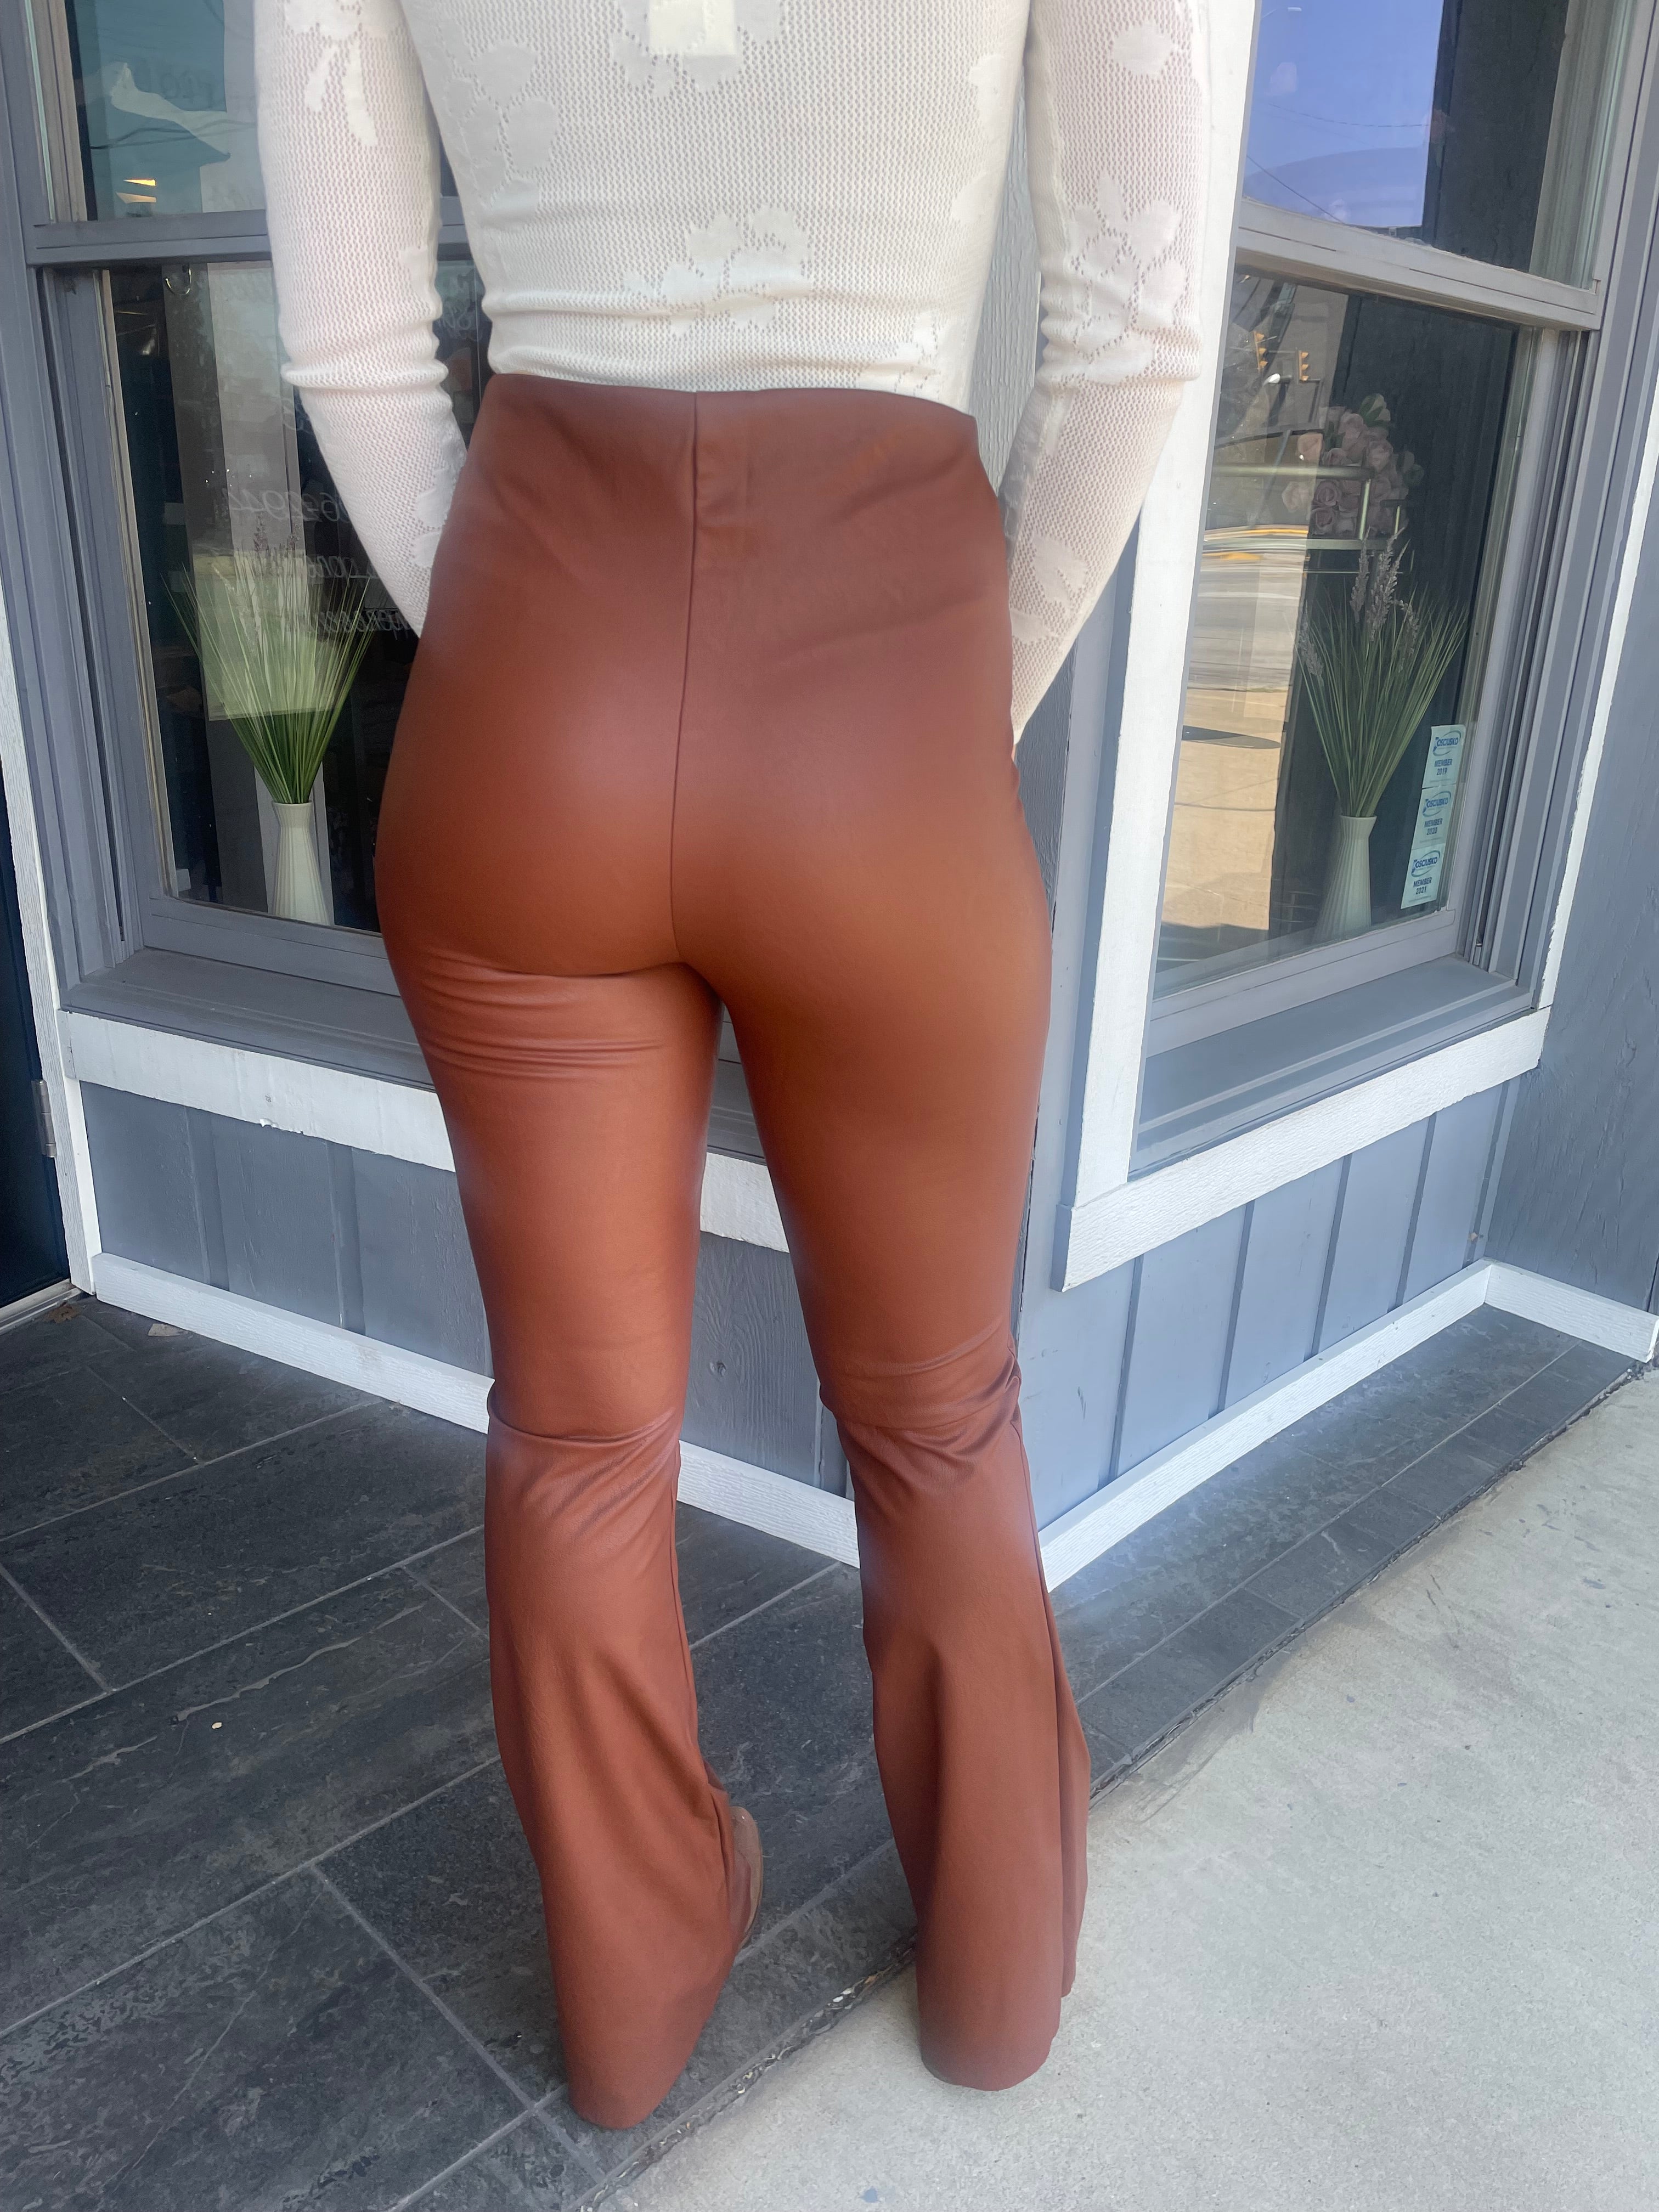 Brown Leather Flare Pants